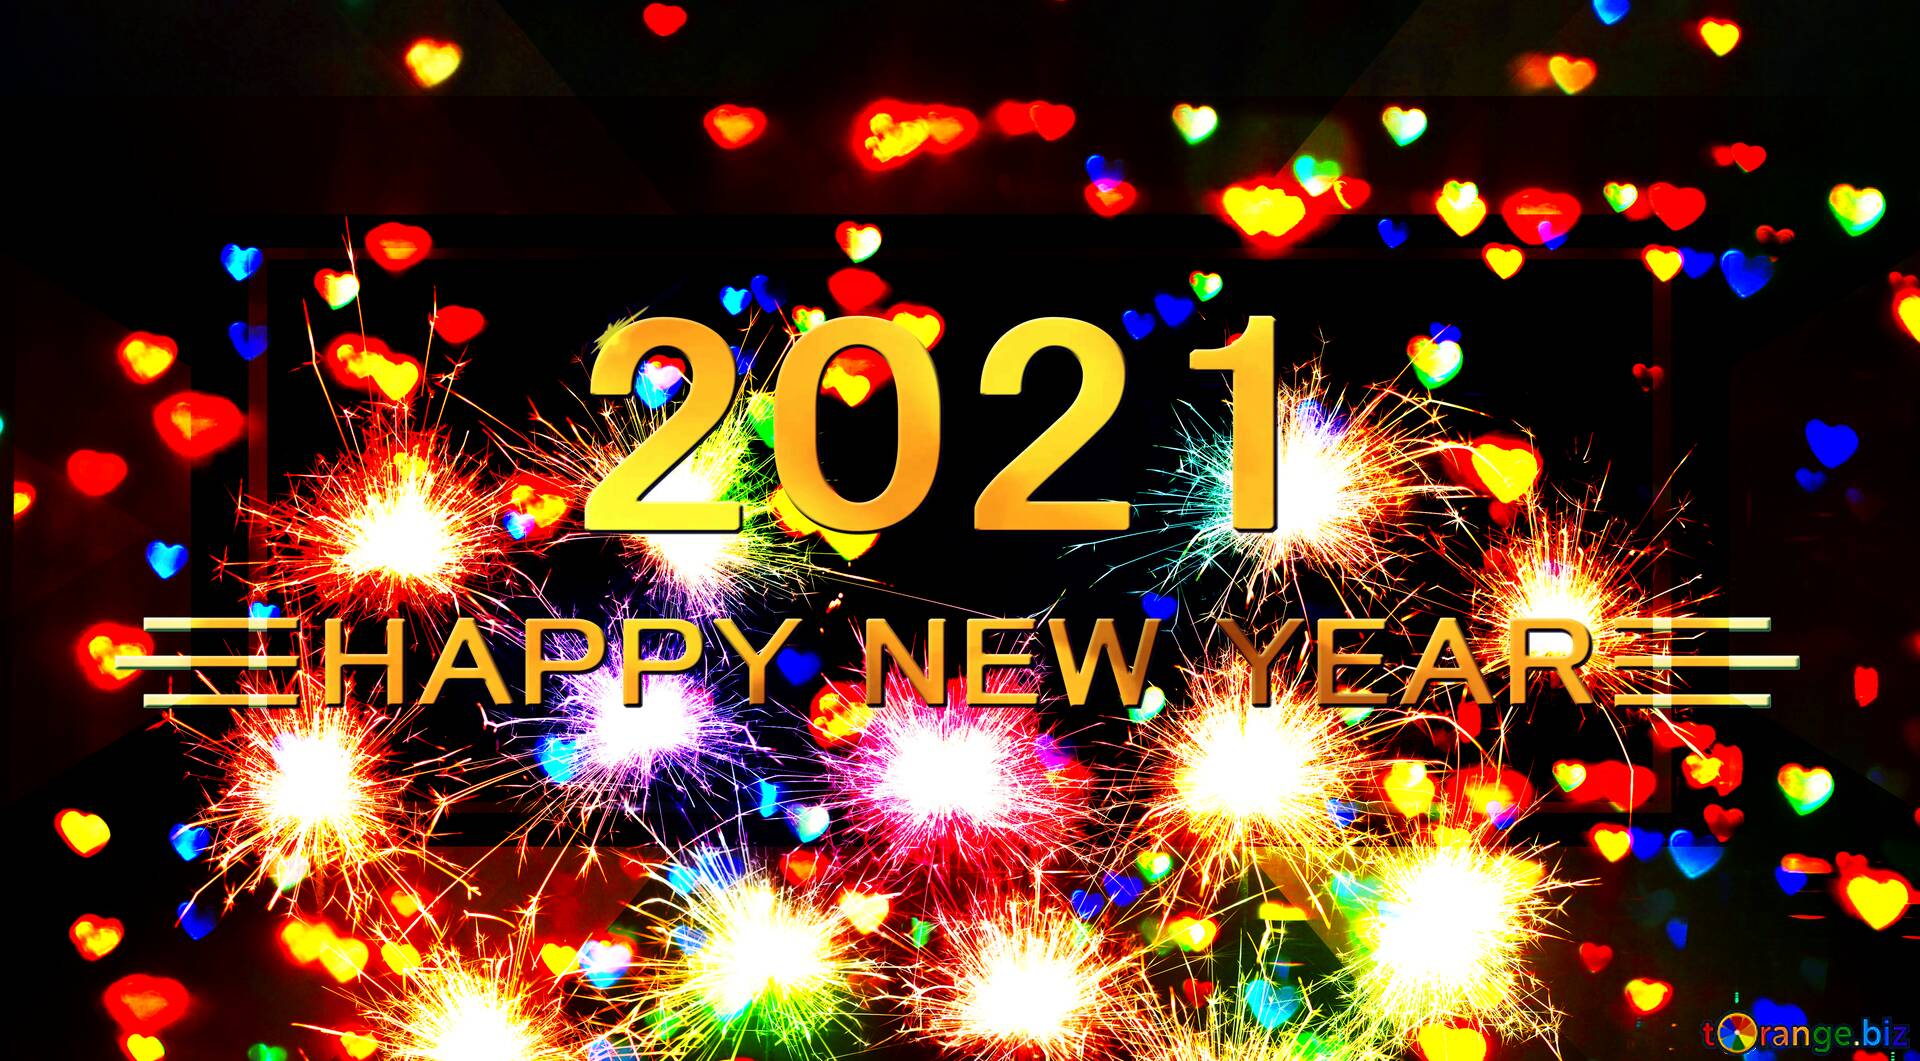 Happy New Year 2021 Wallpapers Wallpaper Cave Tons of awesome happy new year 2021 wallpapers to download for free. happy new year 2021 wallpapers